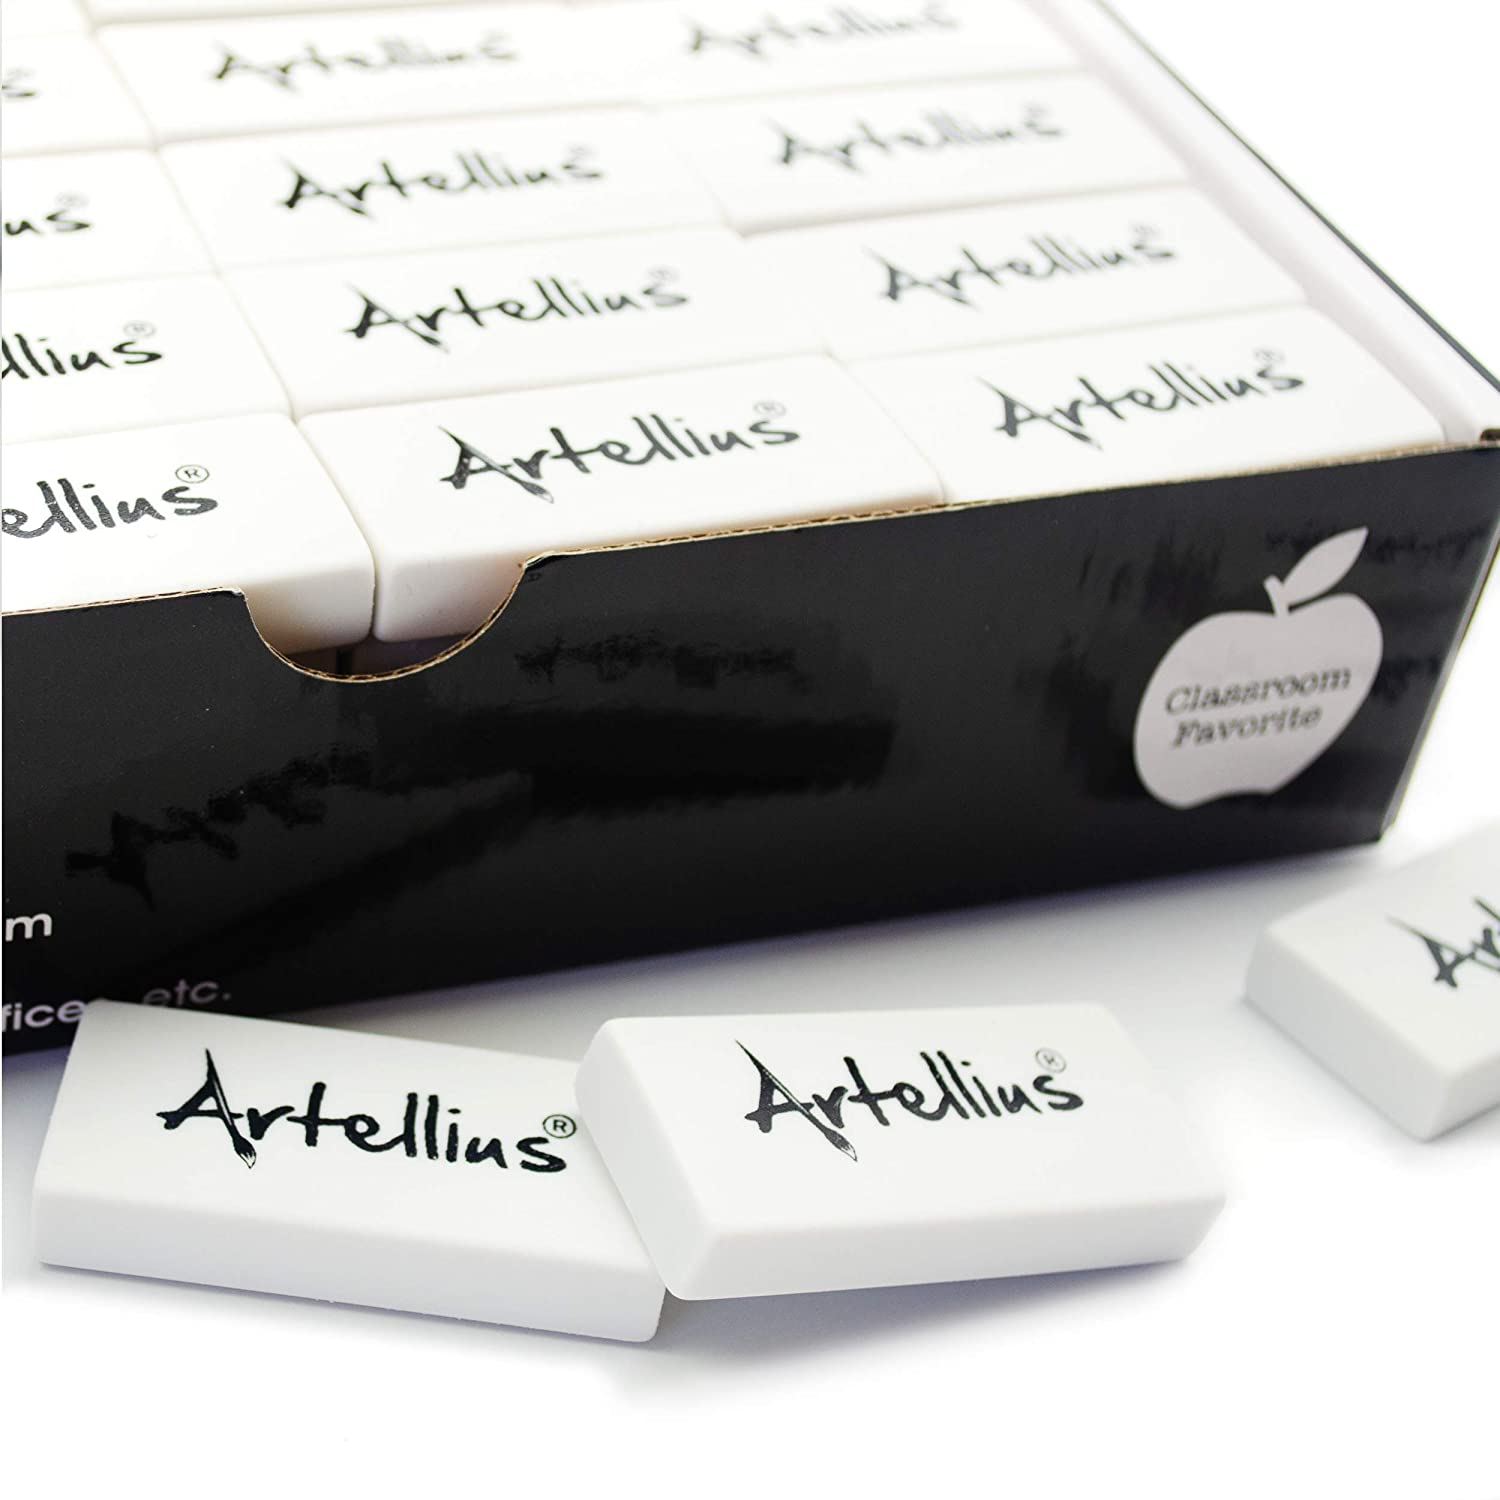 Artellius White Erasers Pack of 100 - Large Size Latex & Smudge Free for Art Classrooms, Drawing, Teachers, Homeschool, and More!